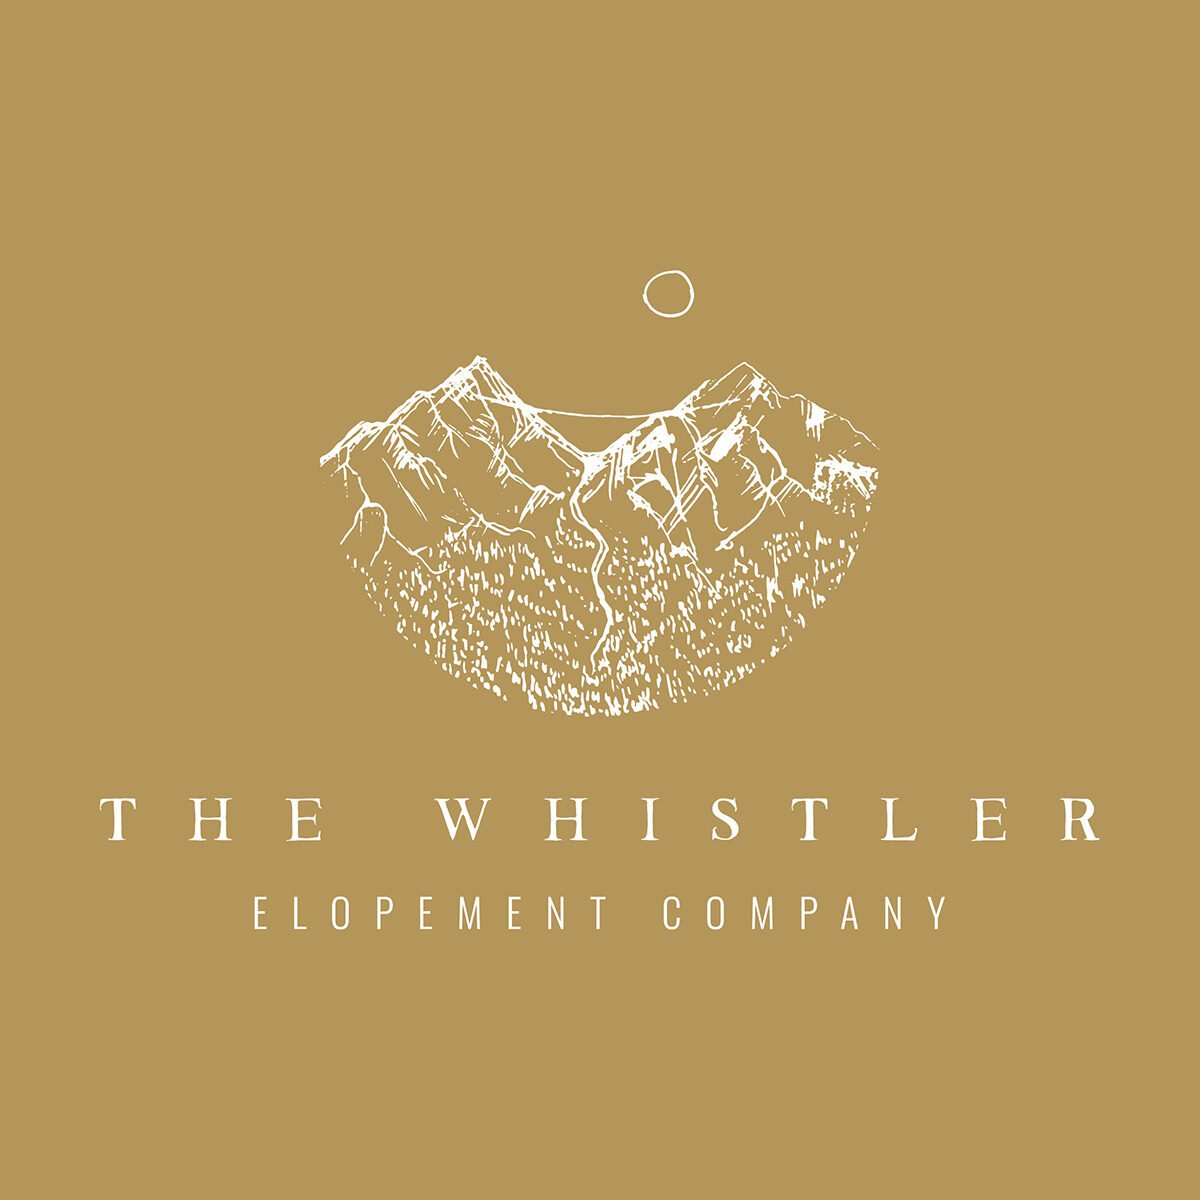 lindsay-mcghee-designs-the-whistler-elopement-company-logo-inverted